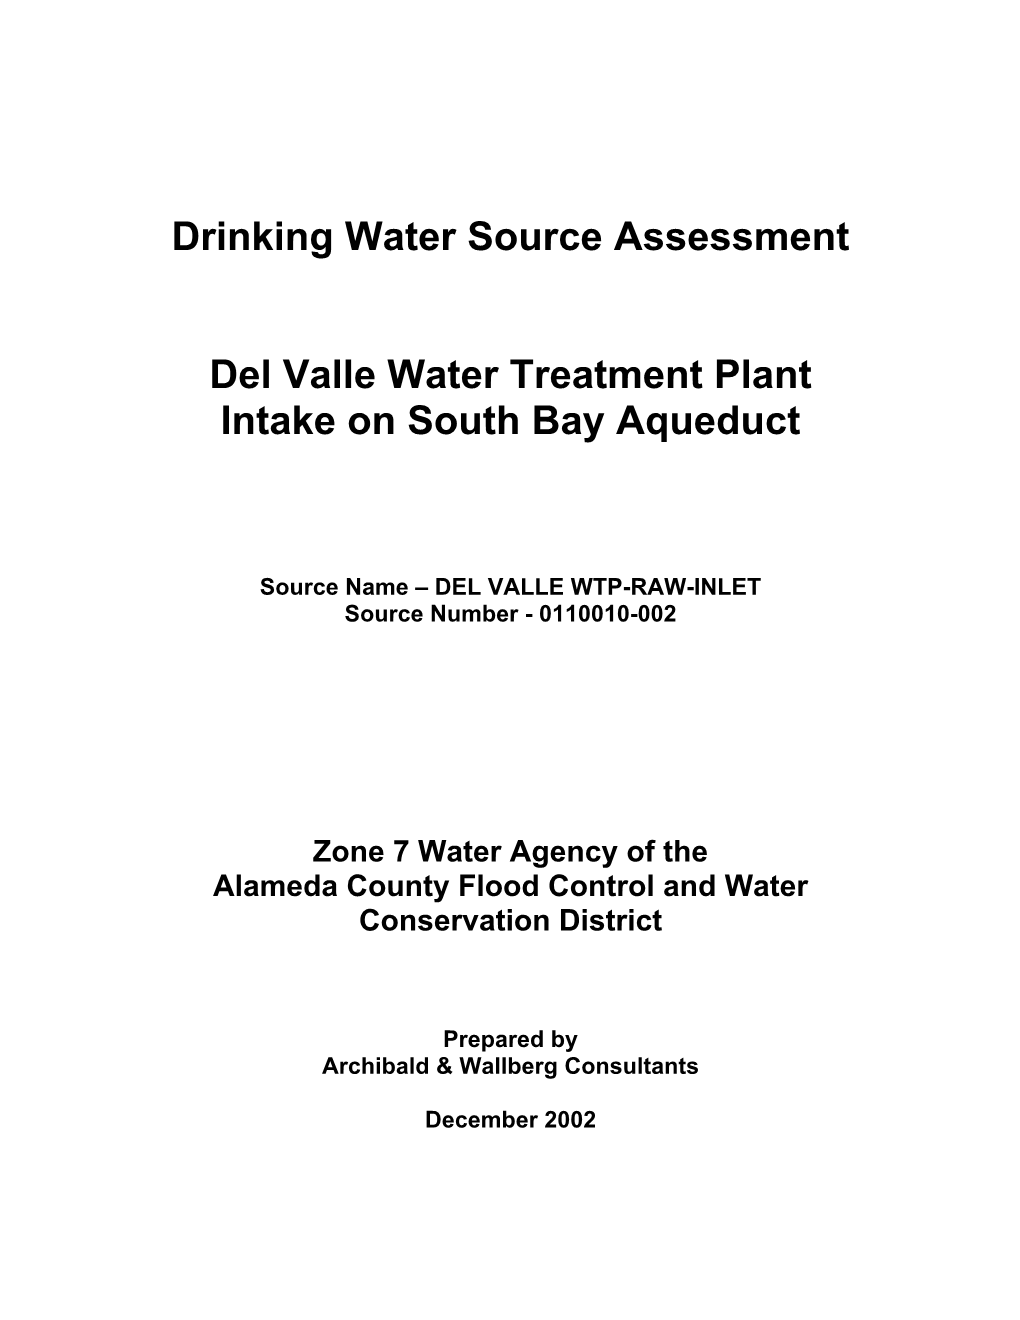 Del Valle Water Treatment Plant Intake on South Bay Aqueduct